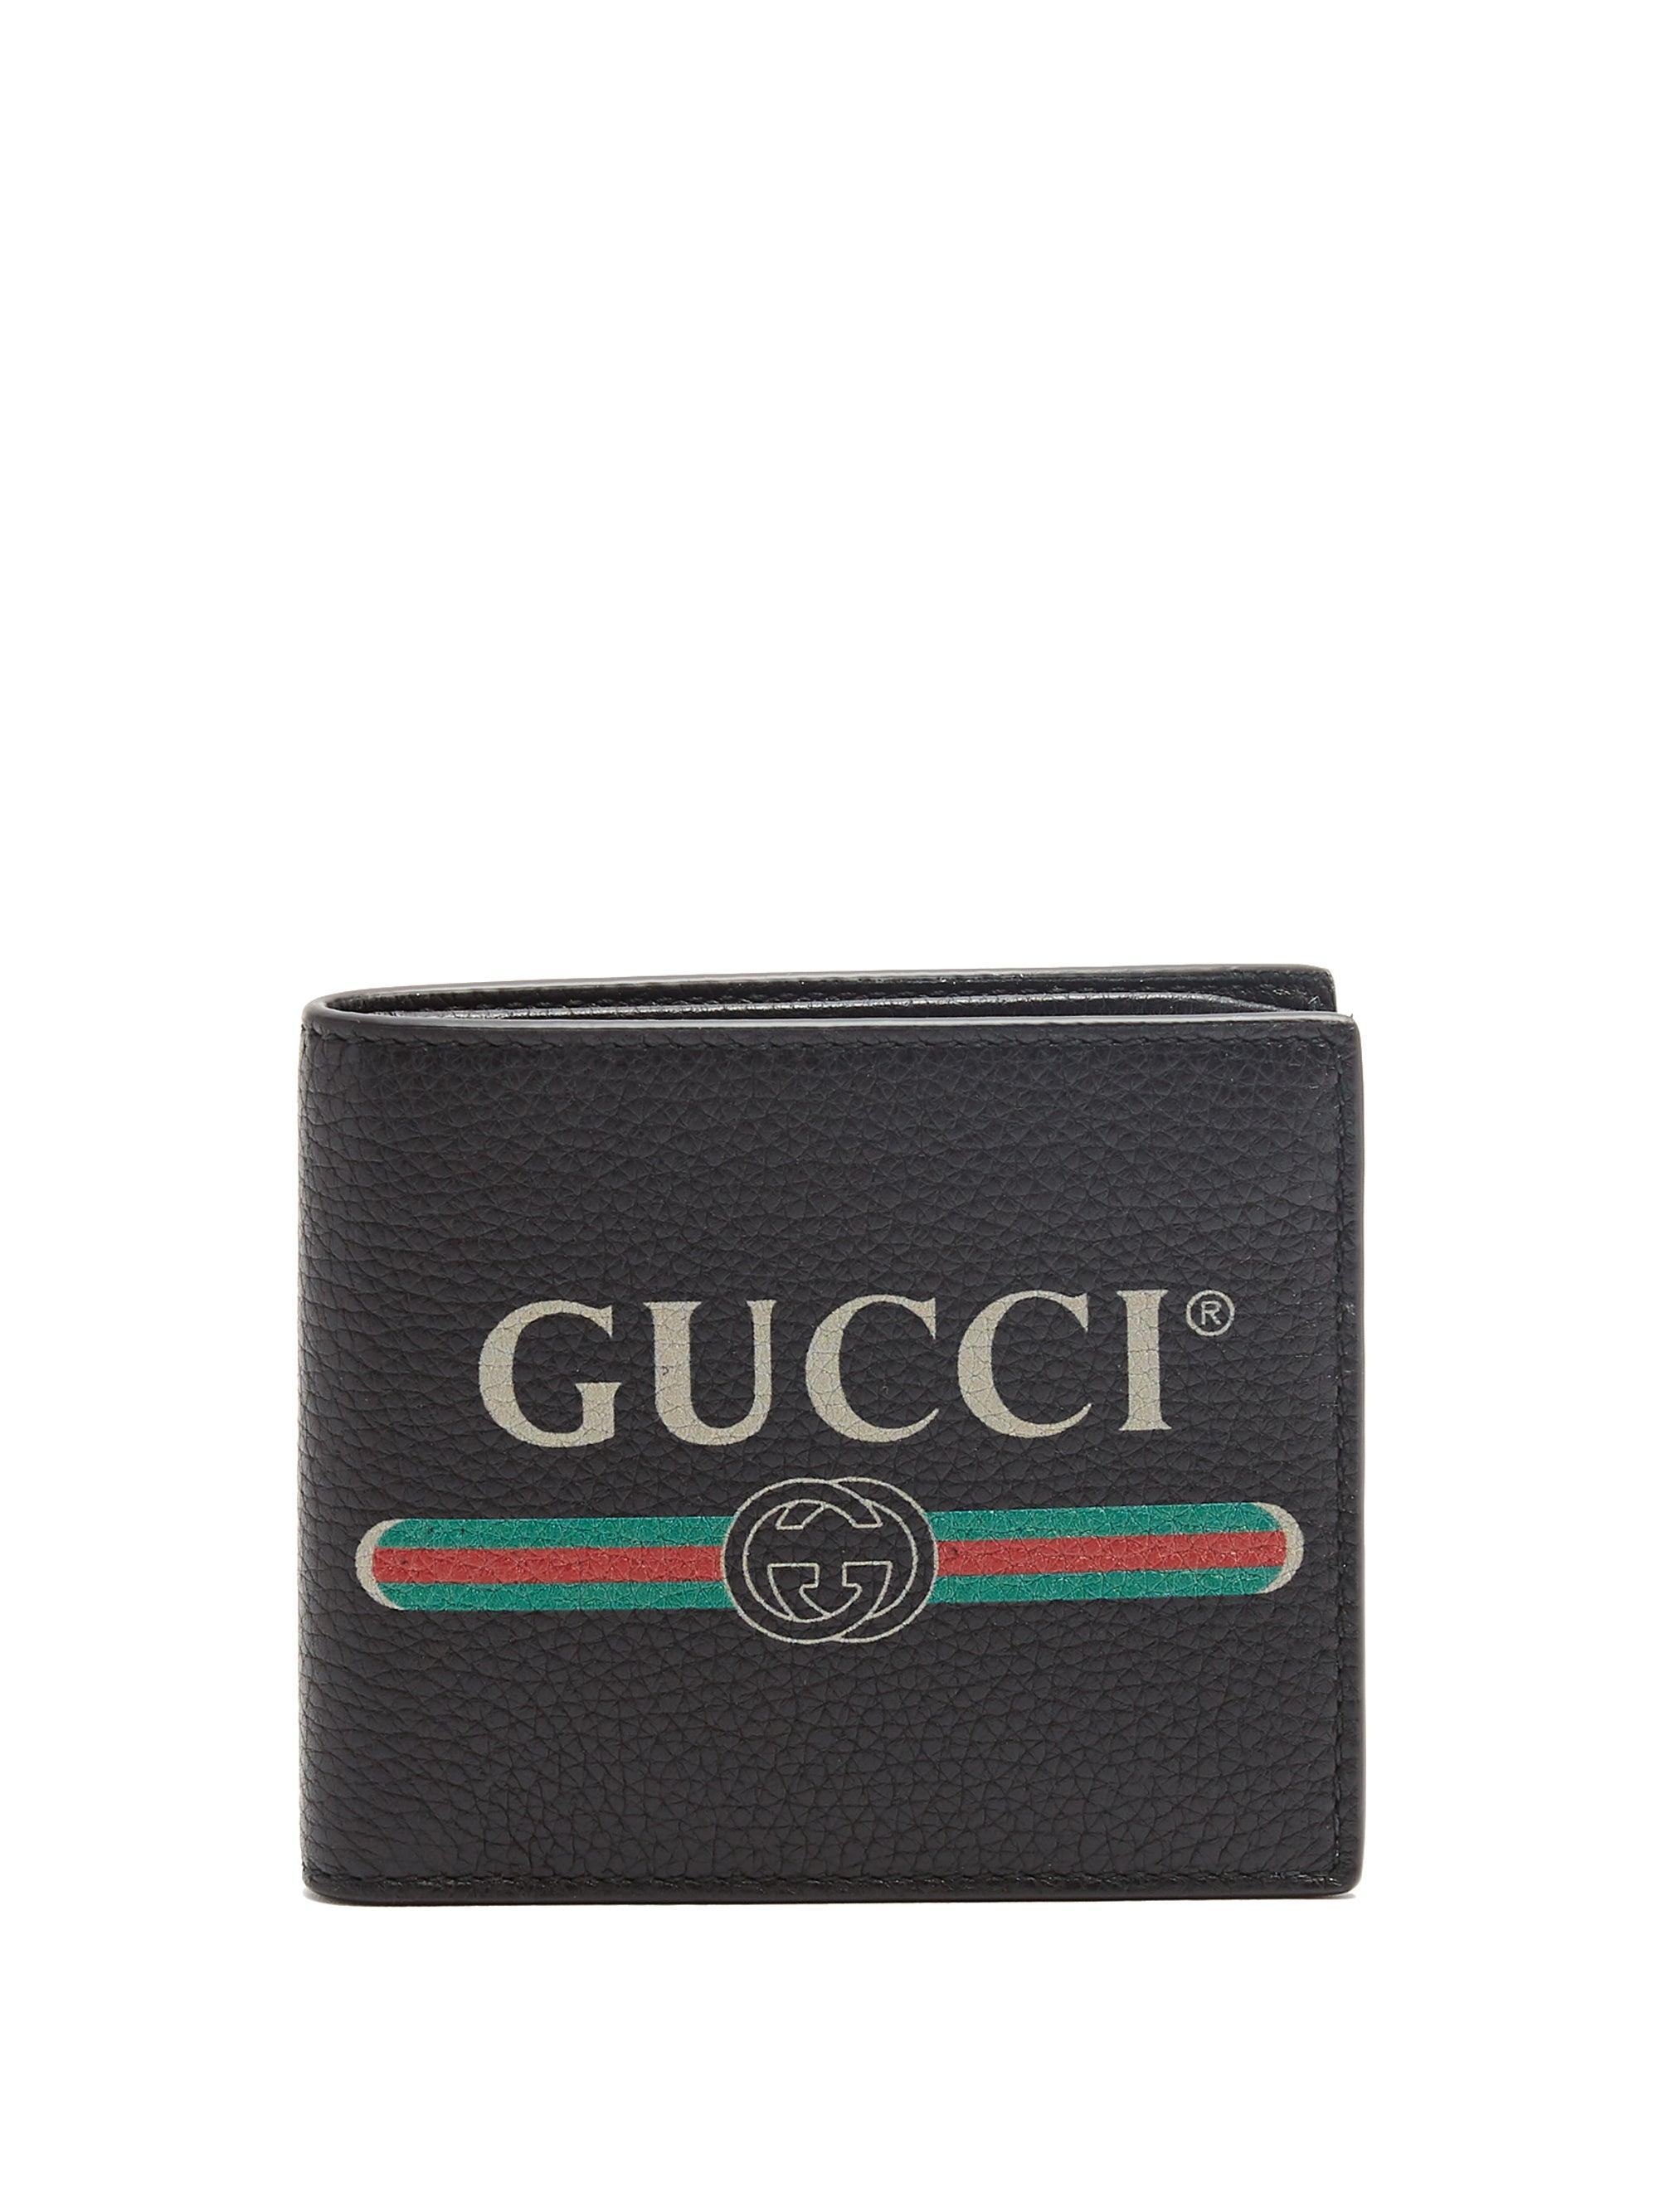 Gucci Print Leather Coin Wallet in 